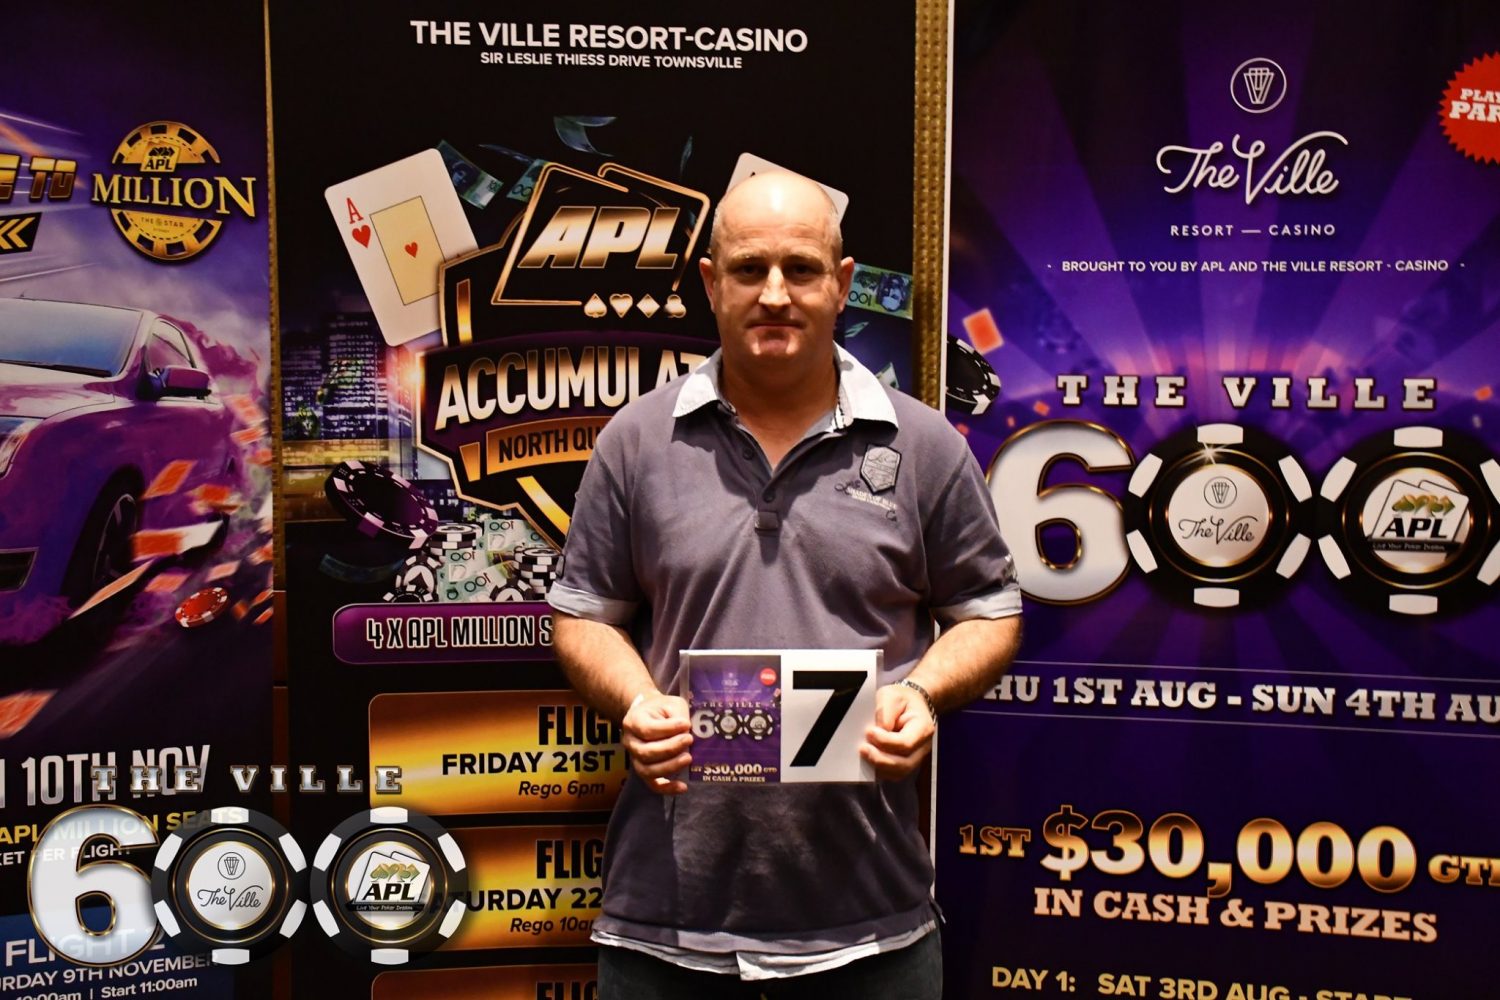 Super High Roller Oliver Parlon Townsville 7th Place $2,500 Cash